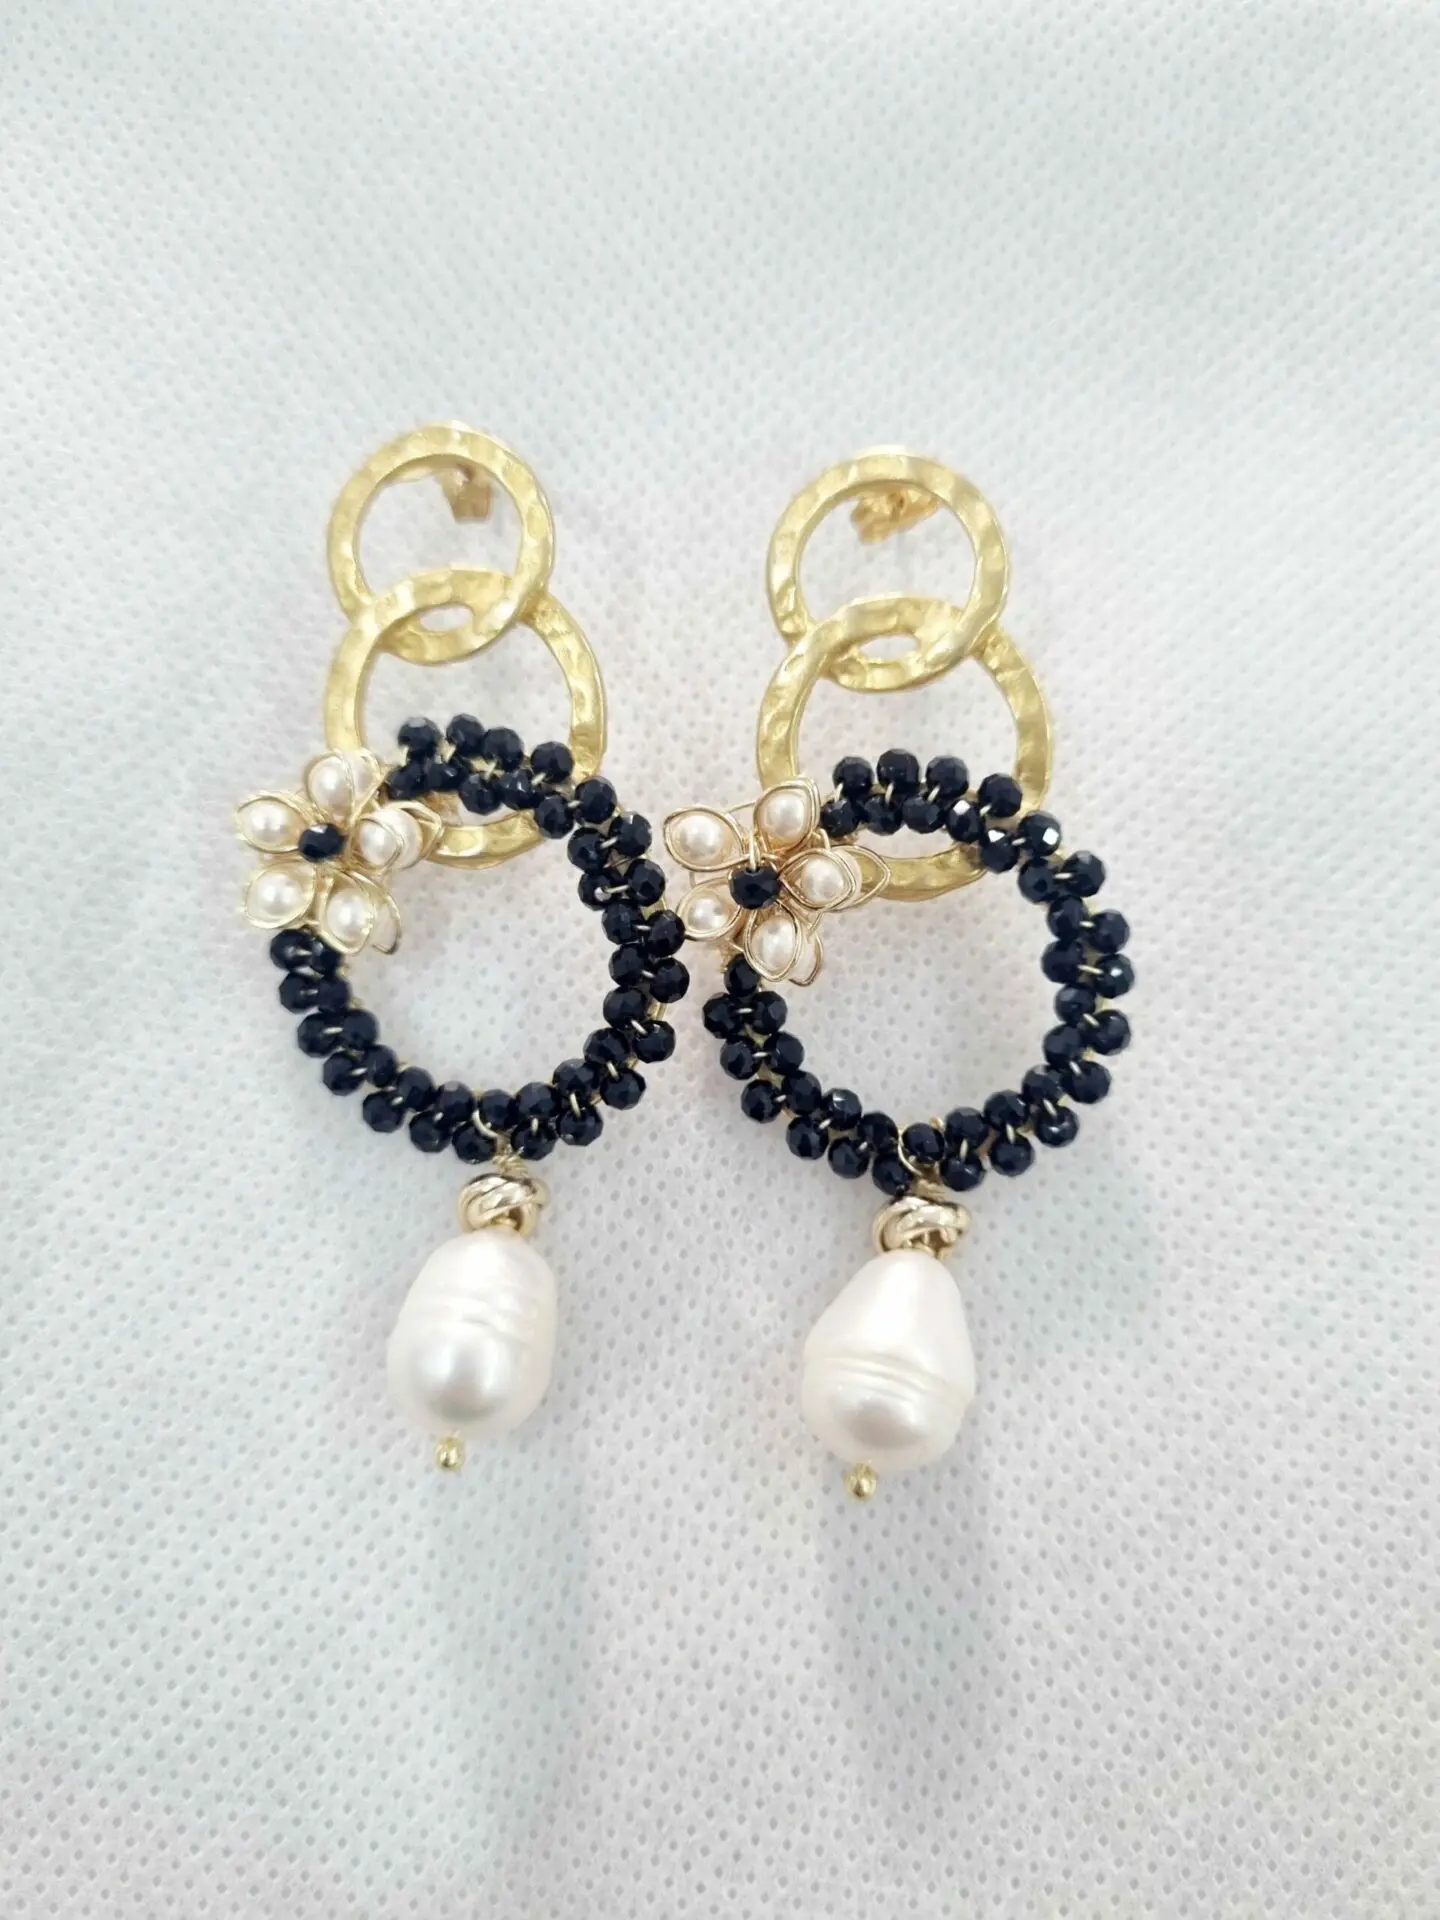 Earrings handcrafted with brass, crystals, baroque pearls and Mallorcan pearls. Length 7cm Weight 8.6g